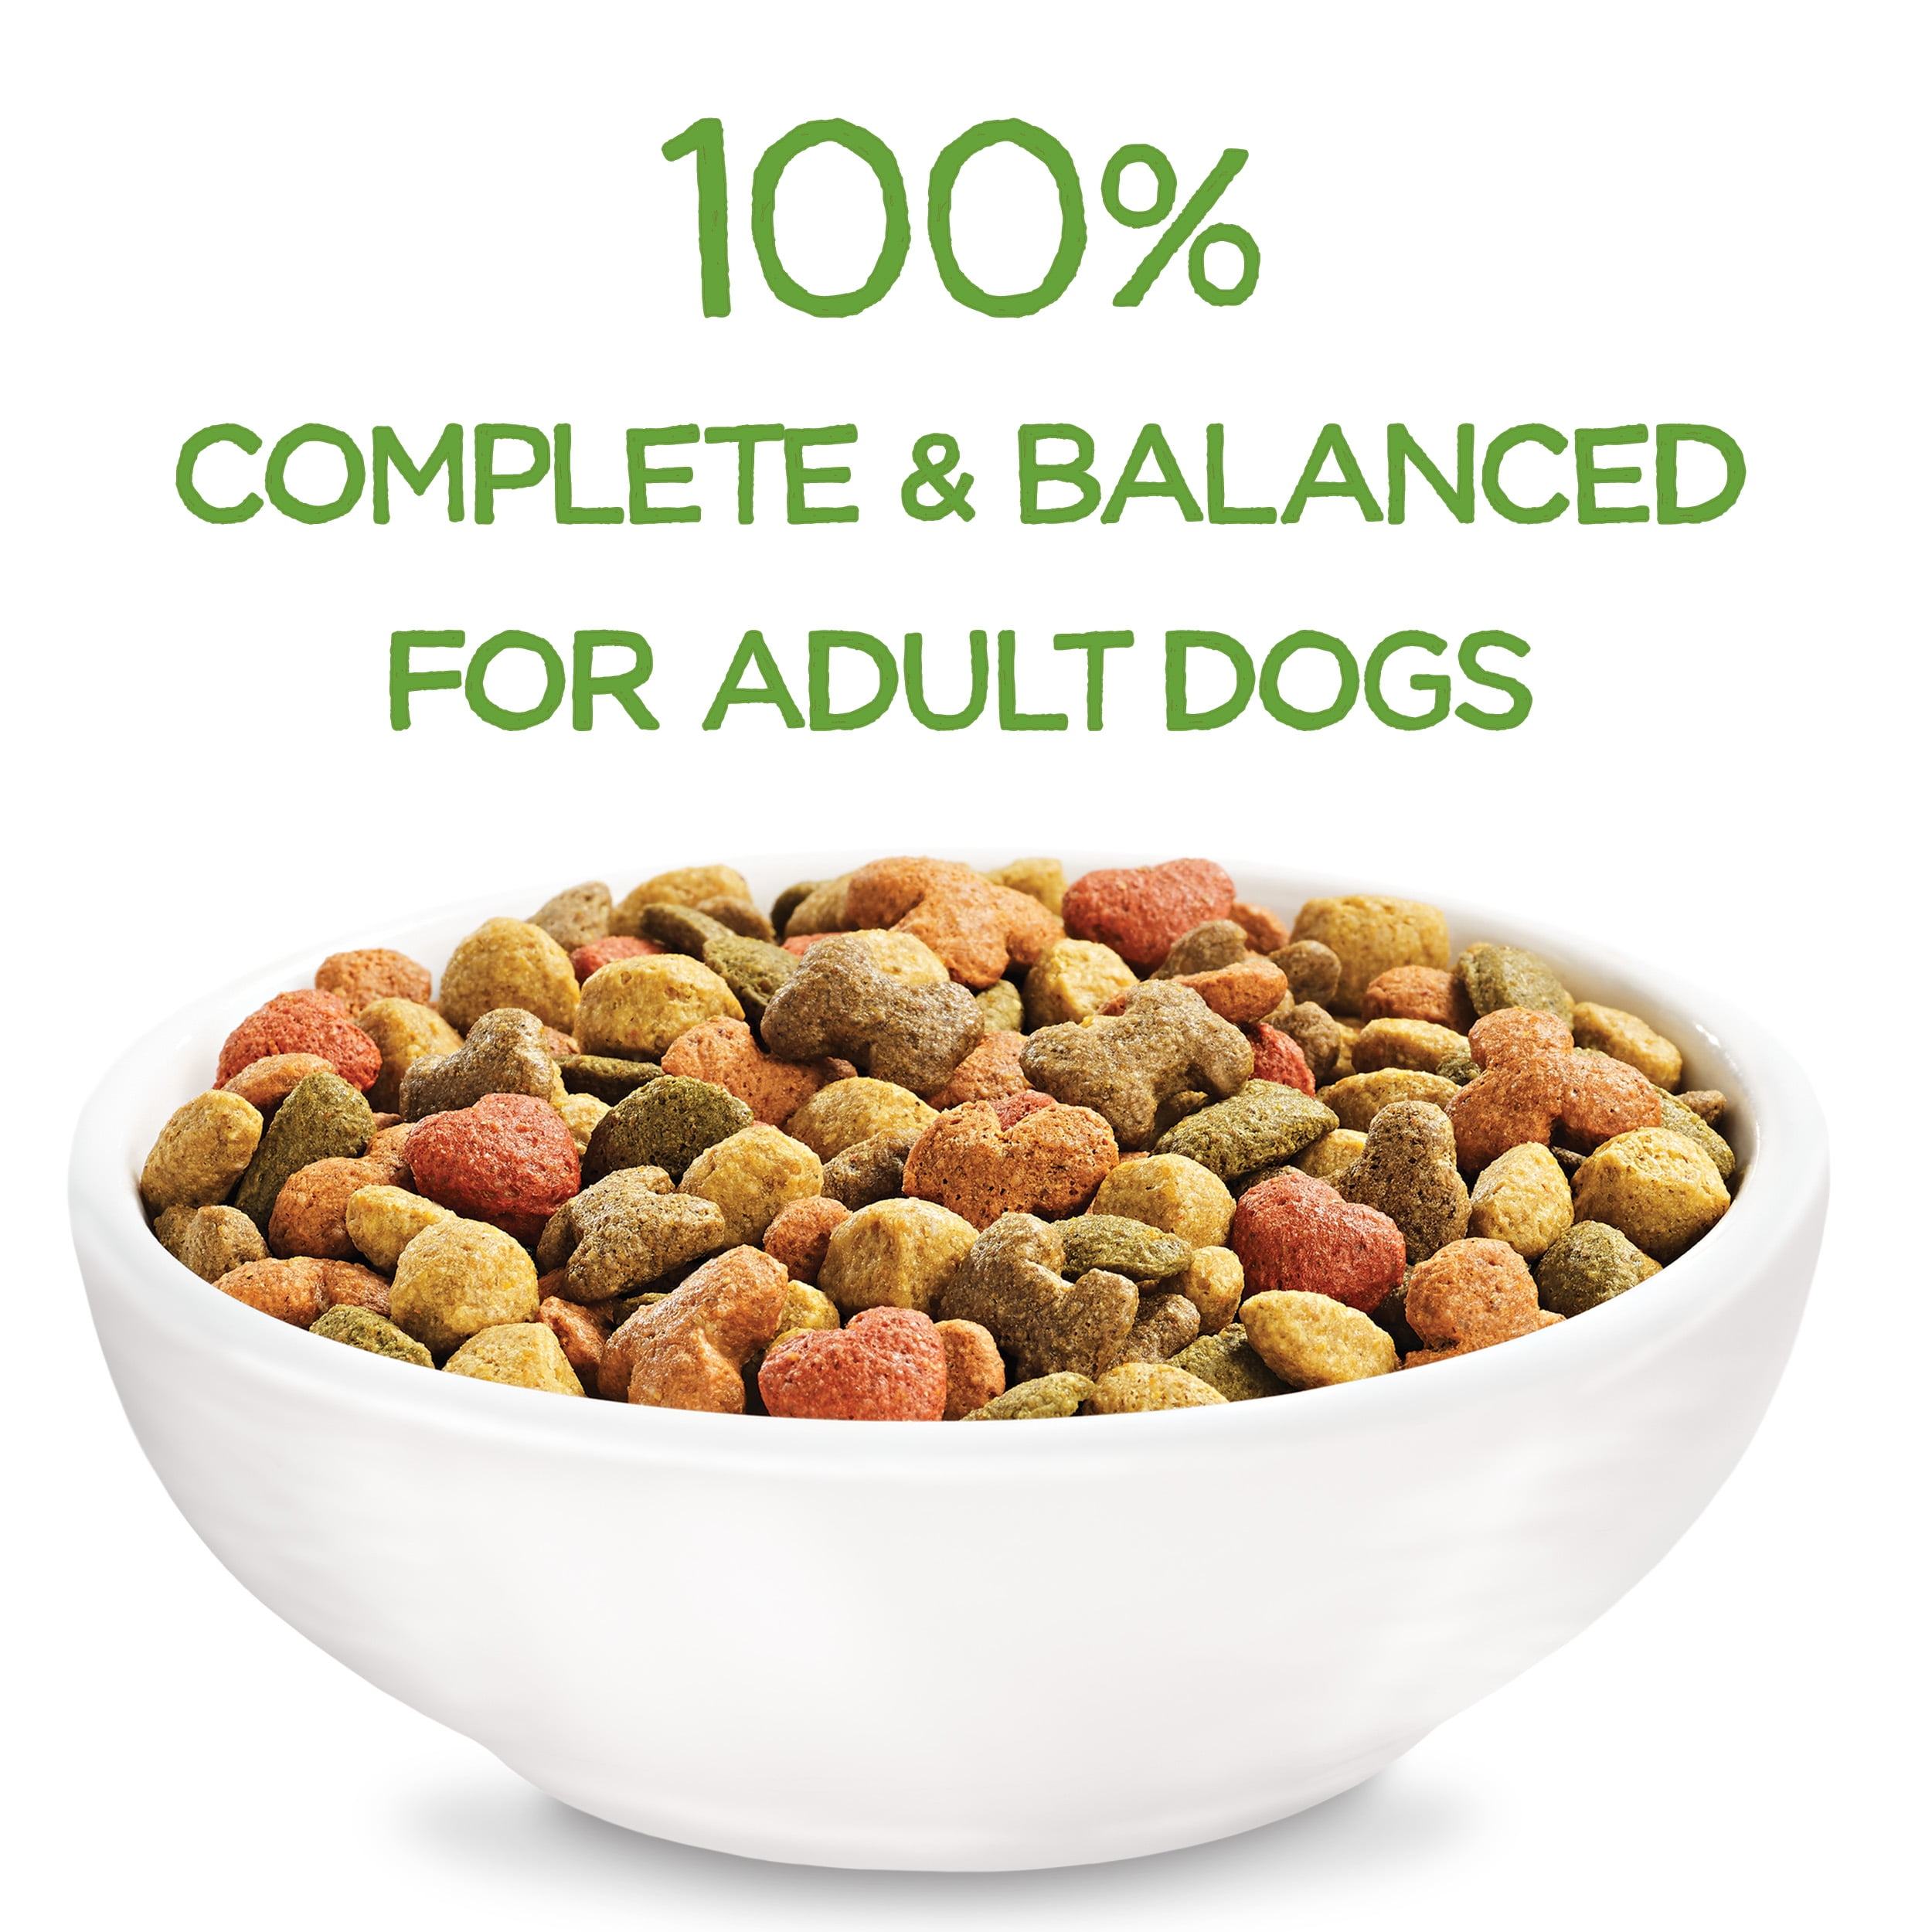 purina beneful healthy weight with real chicken adult dry dog food